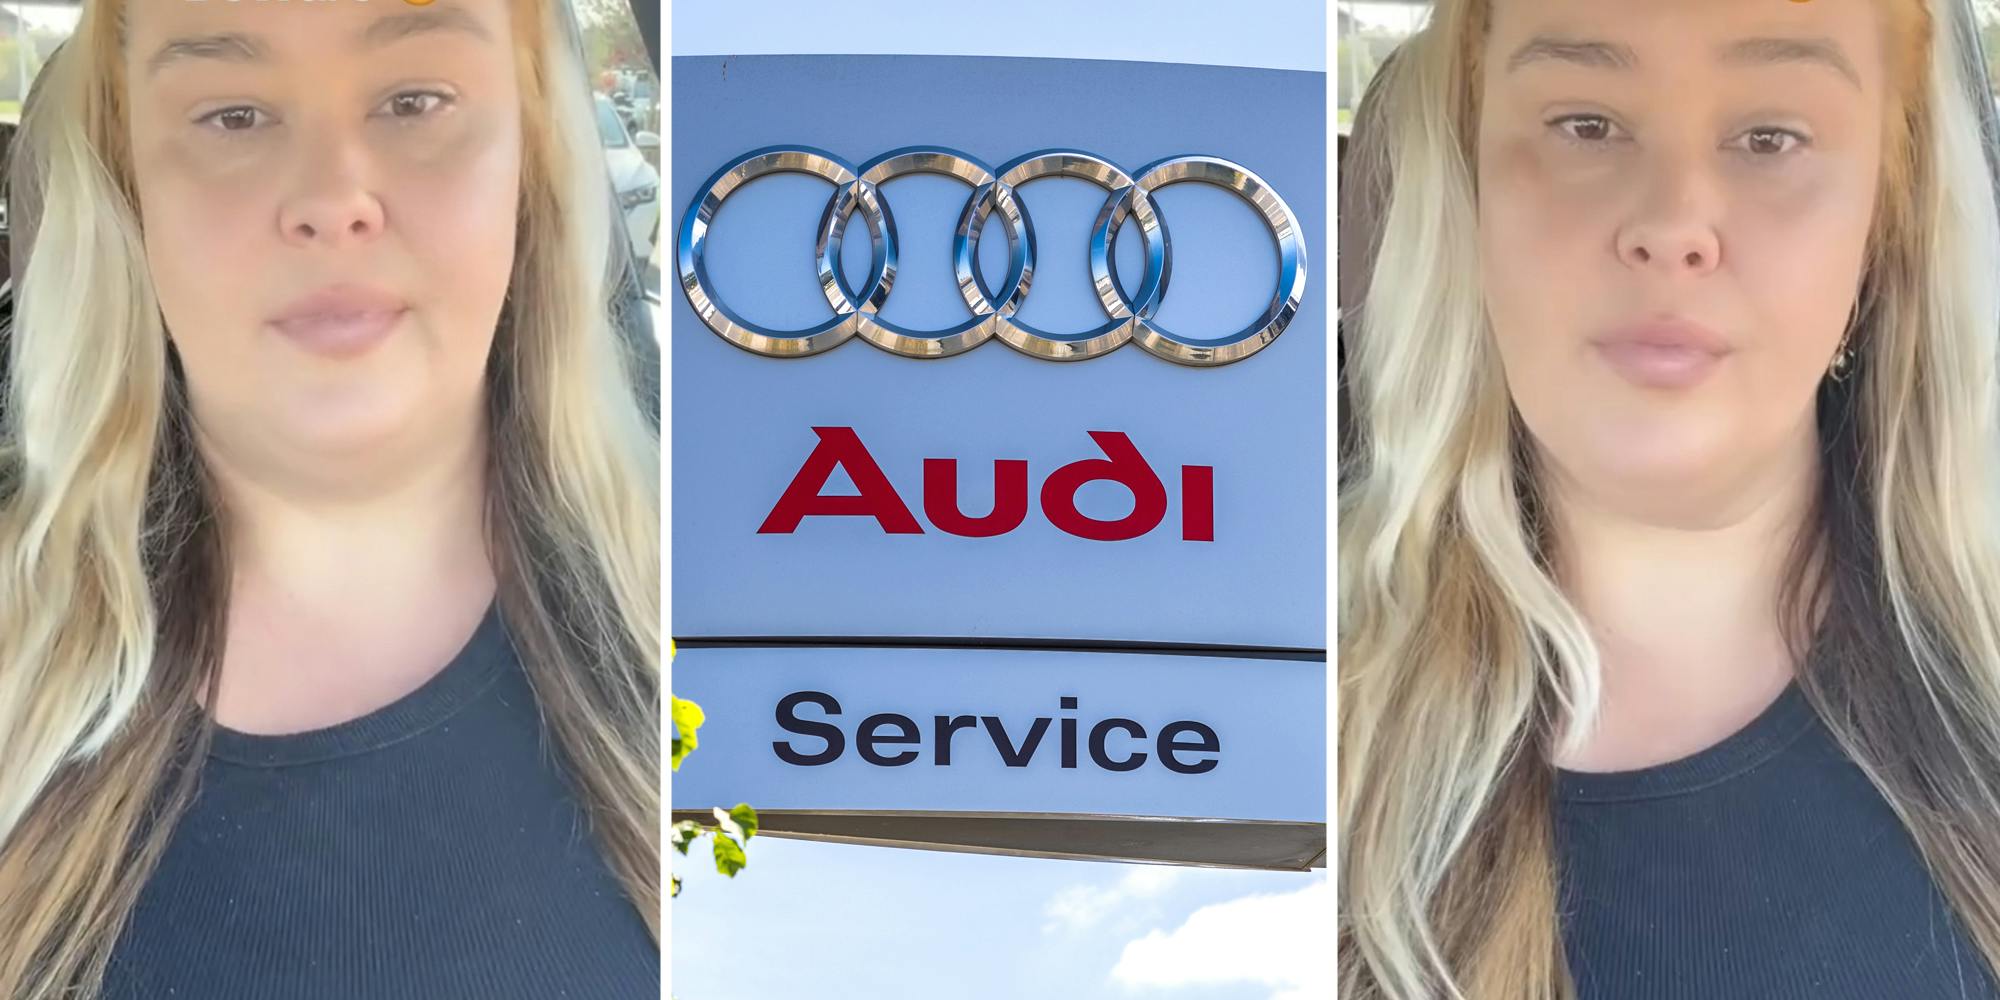 ‘Turbocharger needed already at 50,000 miles??’: Woman issues warning about Audi dealership. It backfires